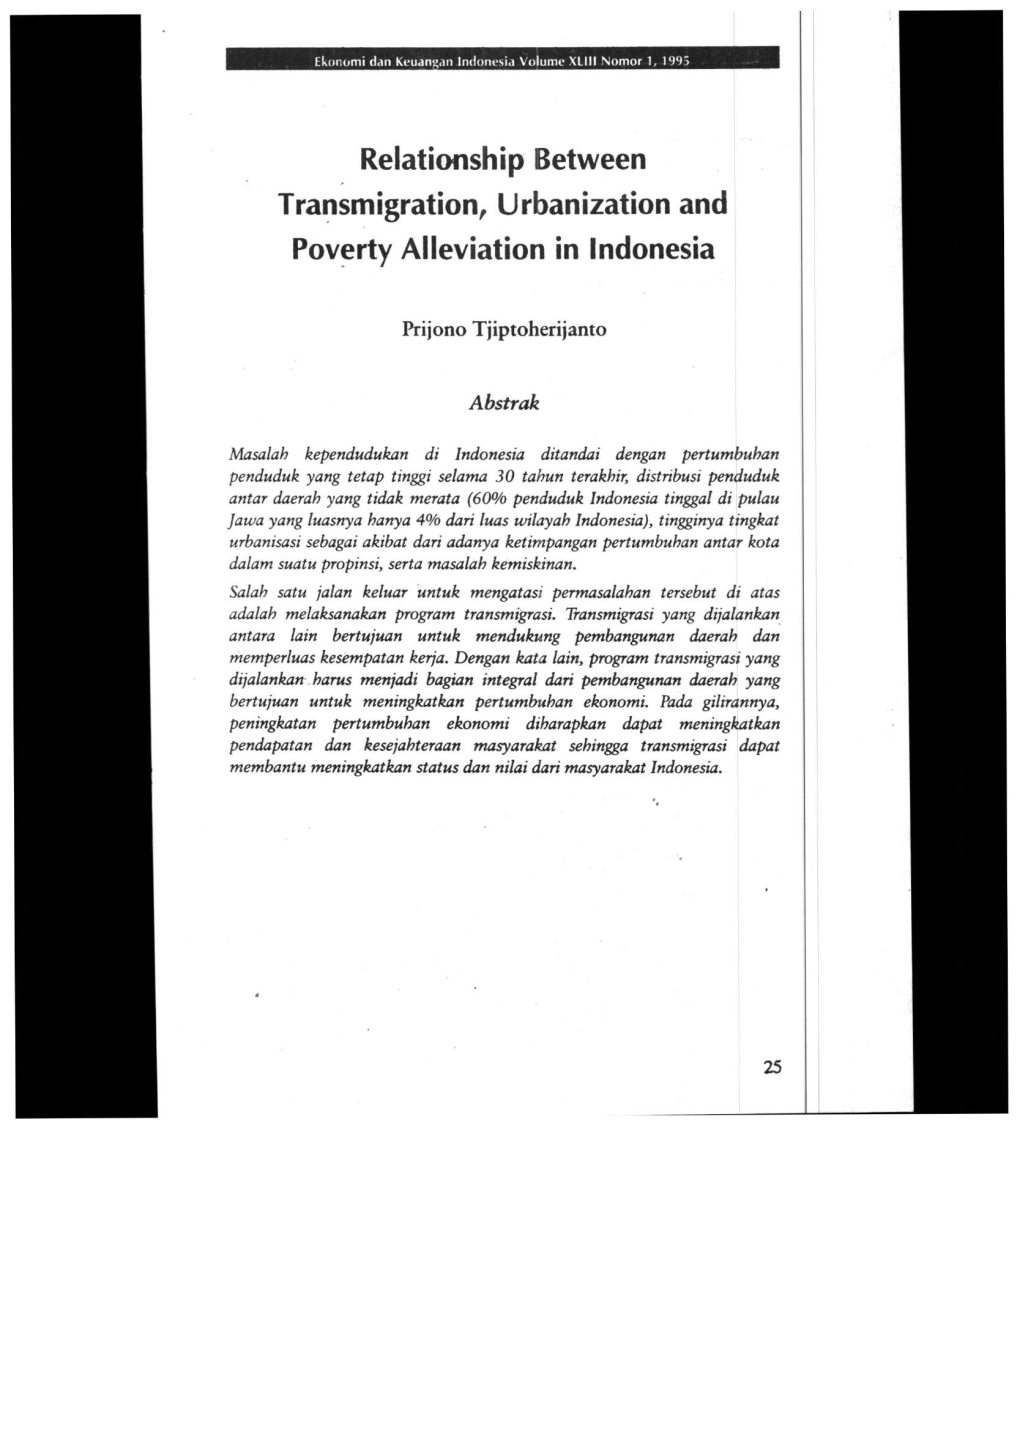 Relationship Between Transmigration, Urbanization and Poverty Alleviation in Indonesia